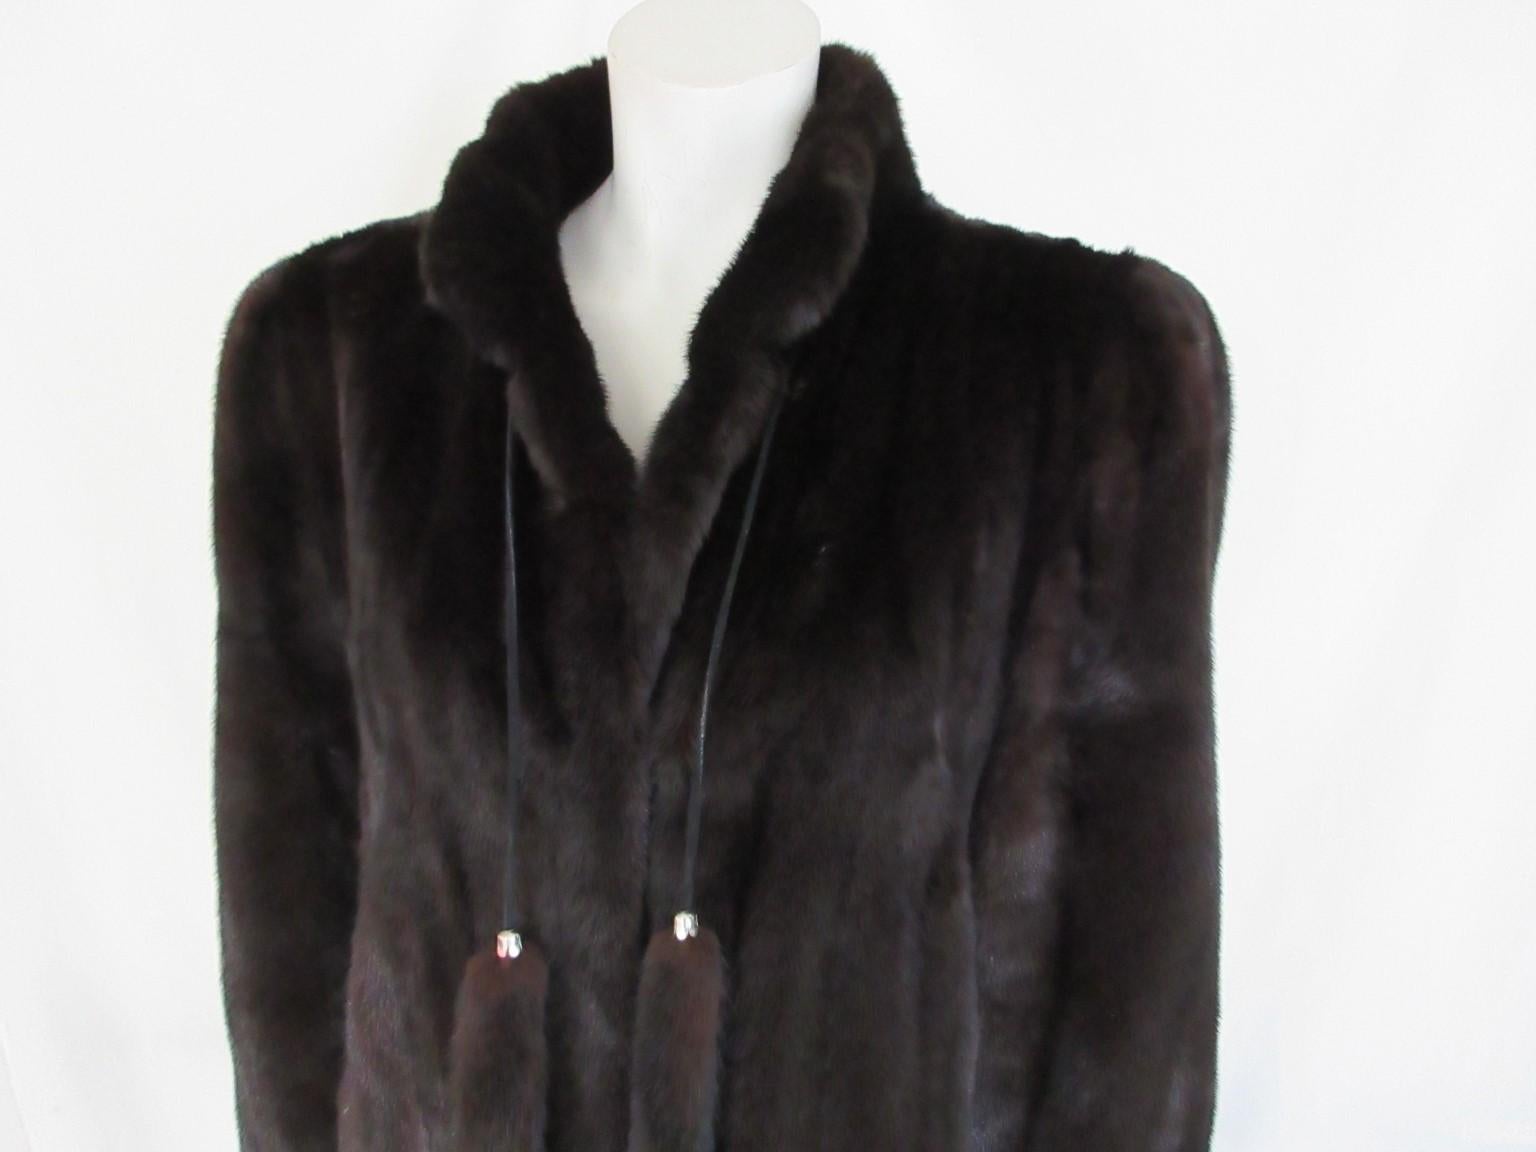 Haute Fourrure MILADY Paris -
Faubourg-Saint Honoré Paris

We offer more luxury fur items, view our front store

Details:
This dark brown coat is made of soft quality sheared mink fur.
Very soft, high quality sheared mink
with 2 tassels, 3 closing